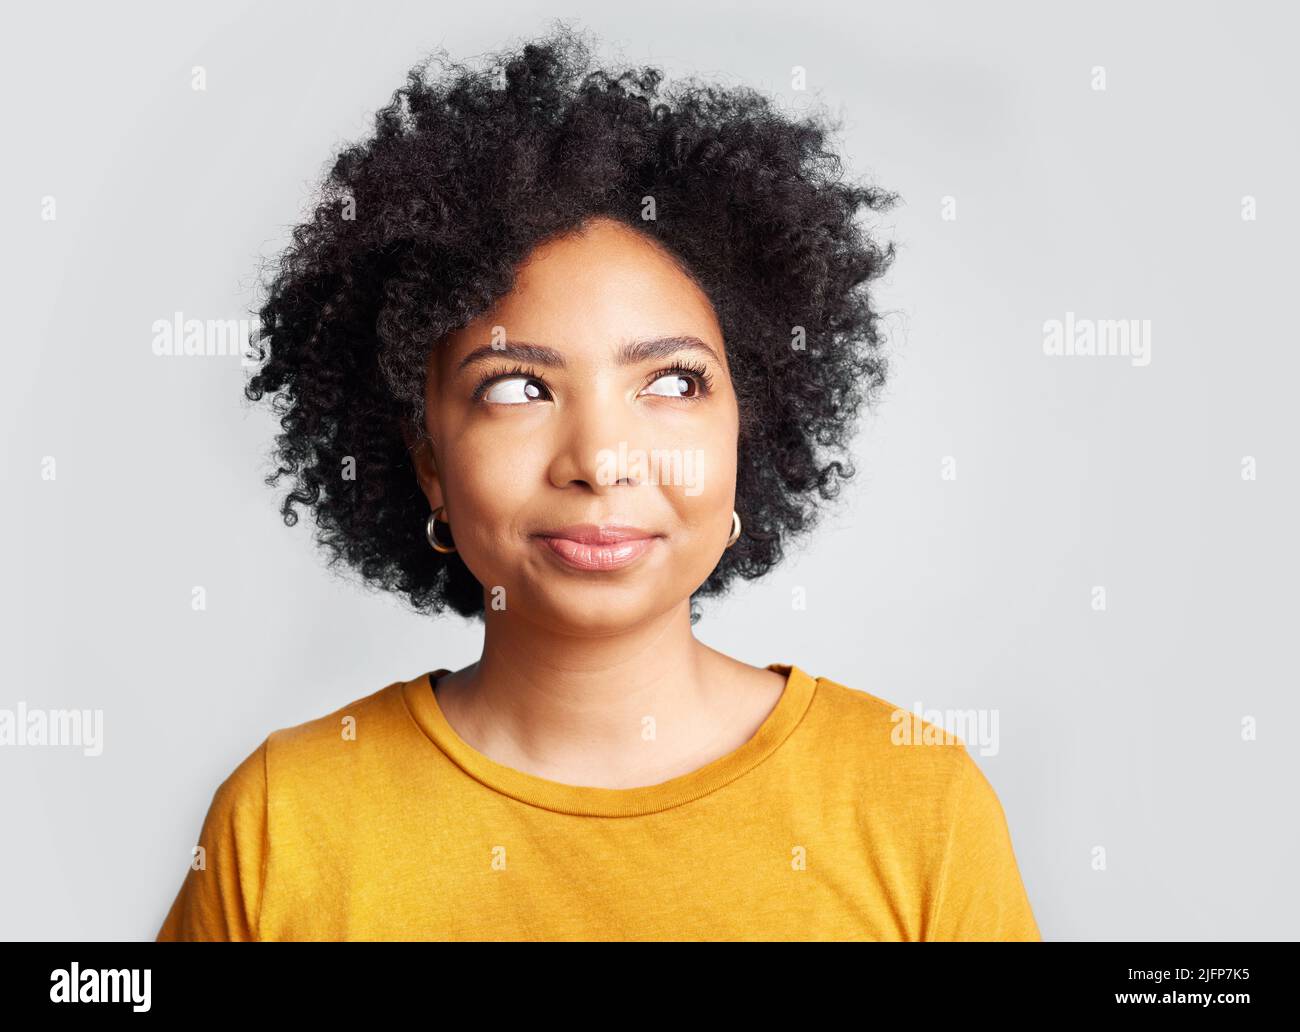 I didnt want to say anything. Shot of a young woman looking away while posing against a grey background. Stock Photo